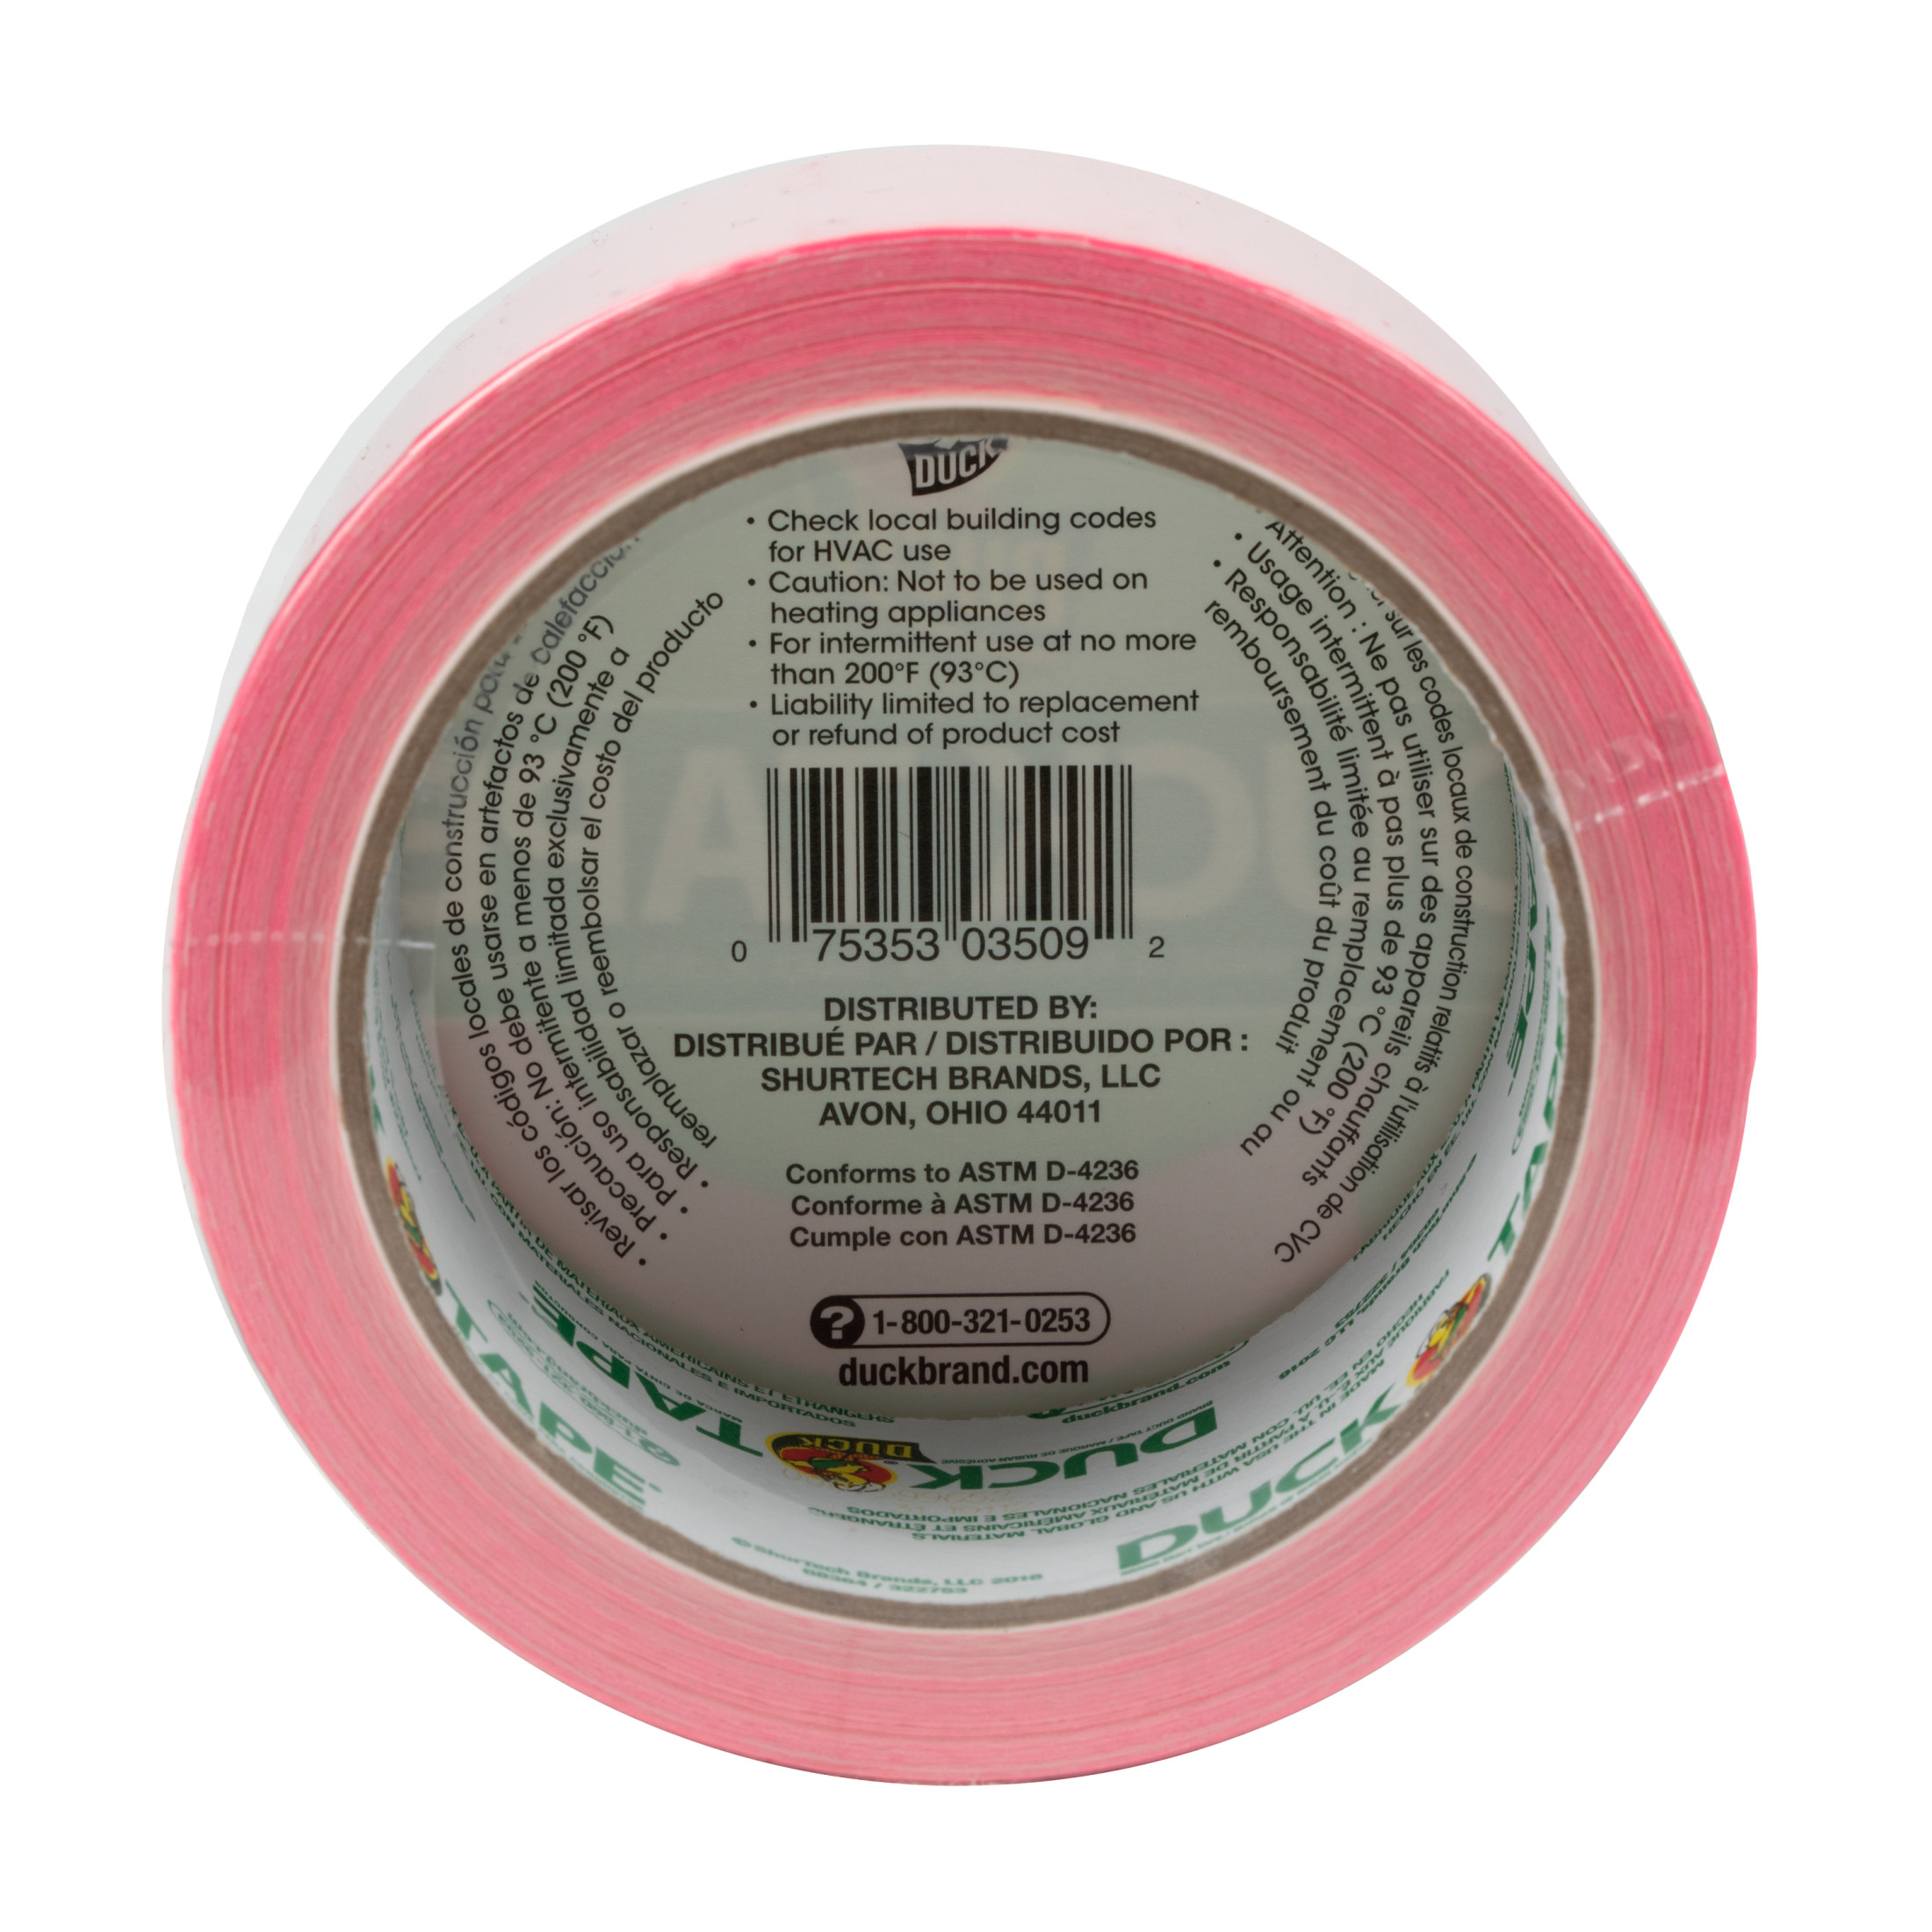 Duck Brand 1.88 in. x 15 yd. Neon Pink Colored Duct Tape - image 5 of 11